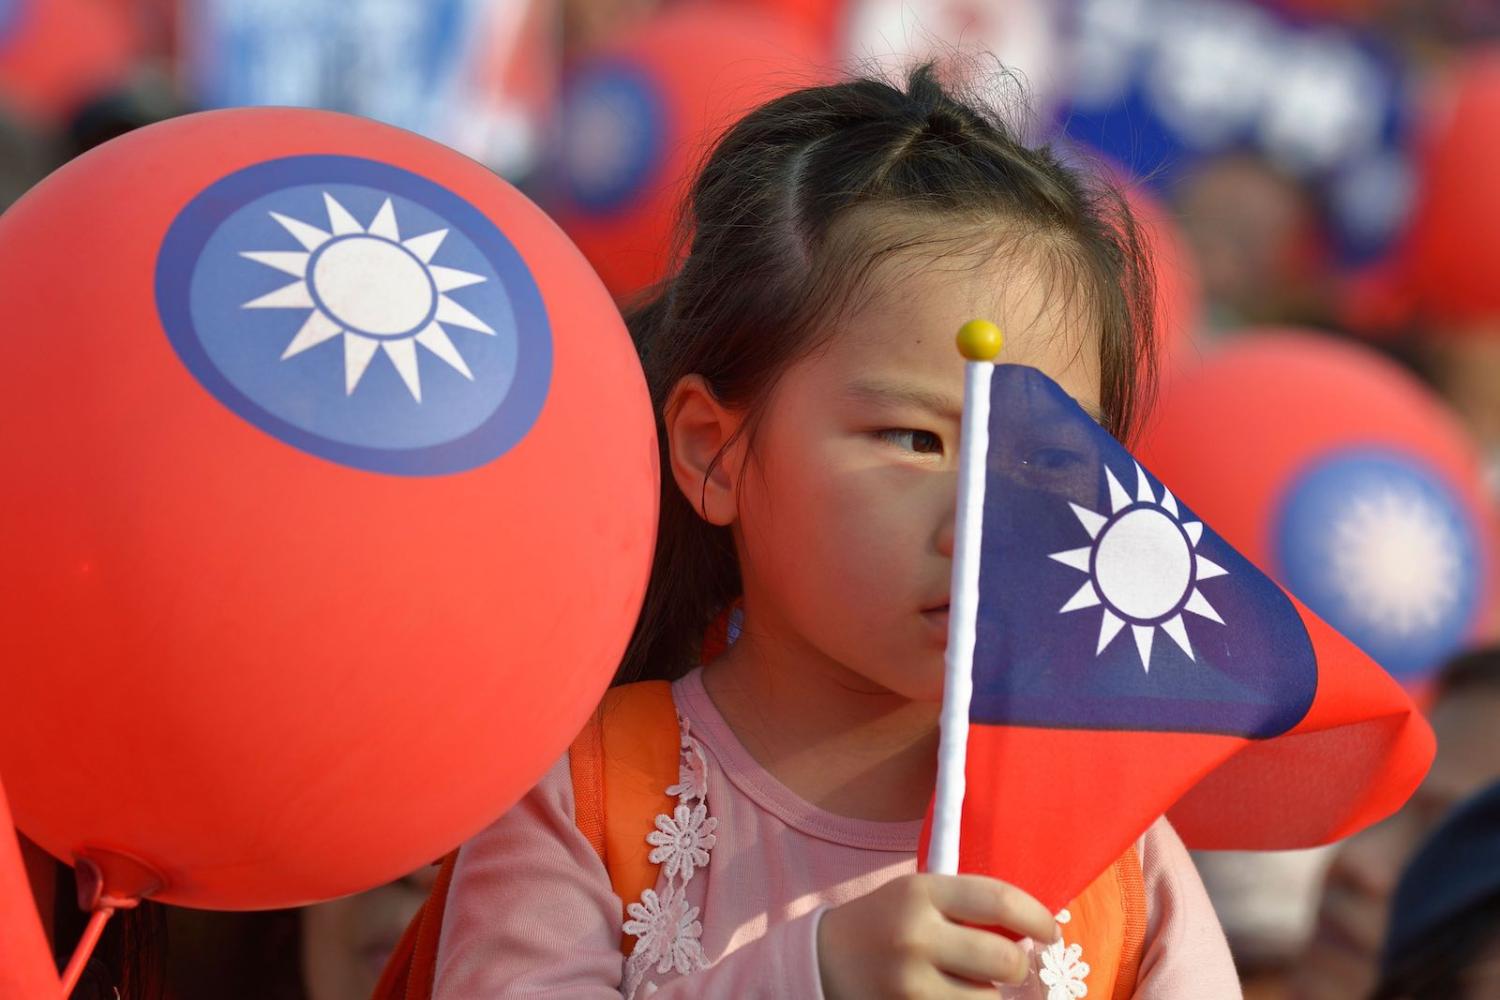 New forces have mixed with historic tensions in Taiwan politics (Photo: Chris Stowers/Flickr)